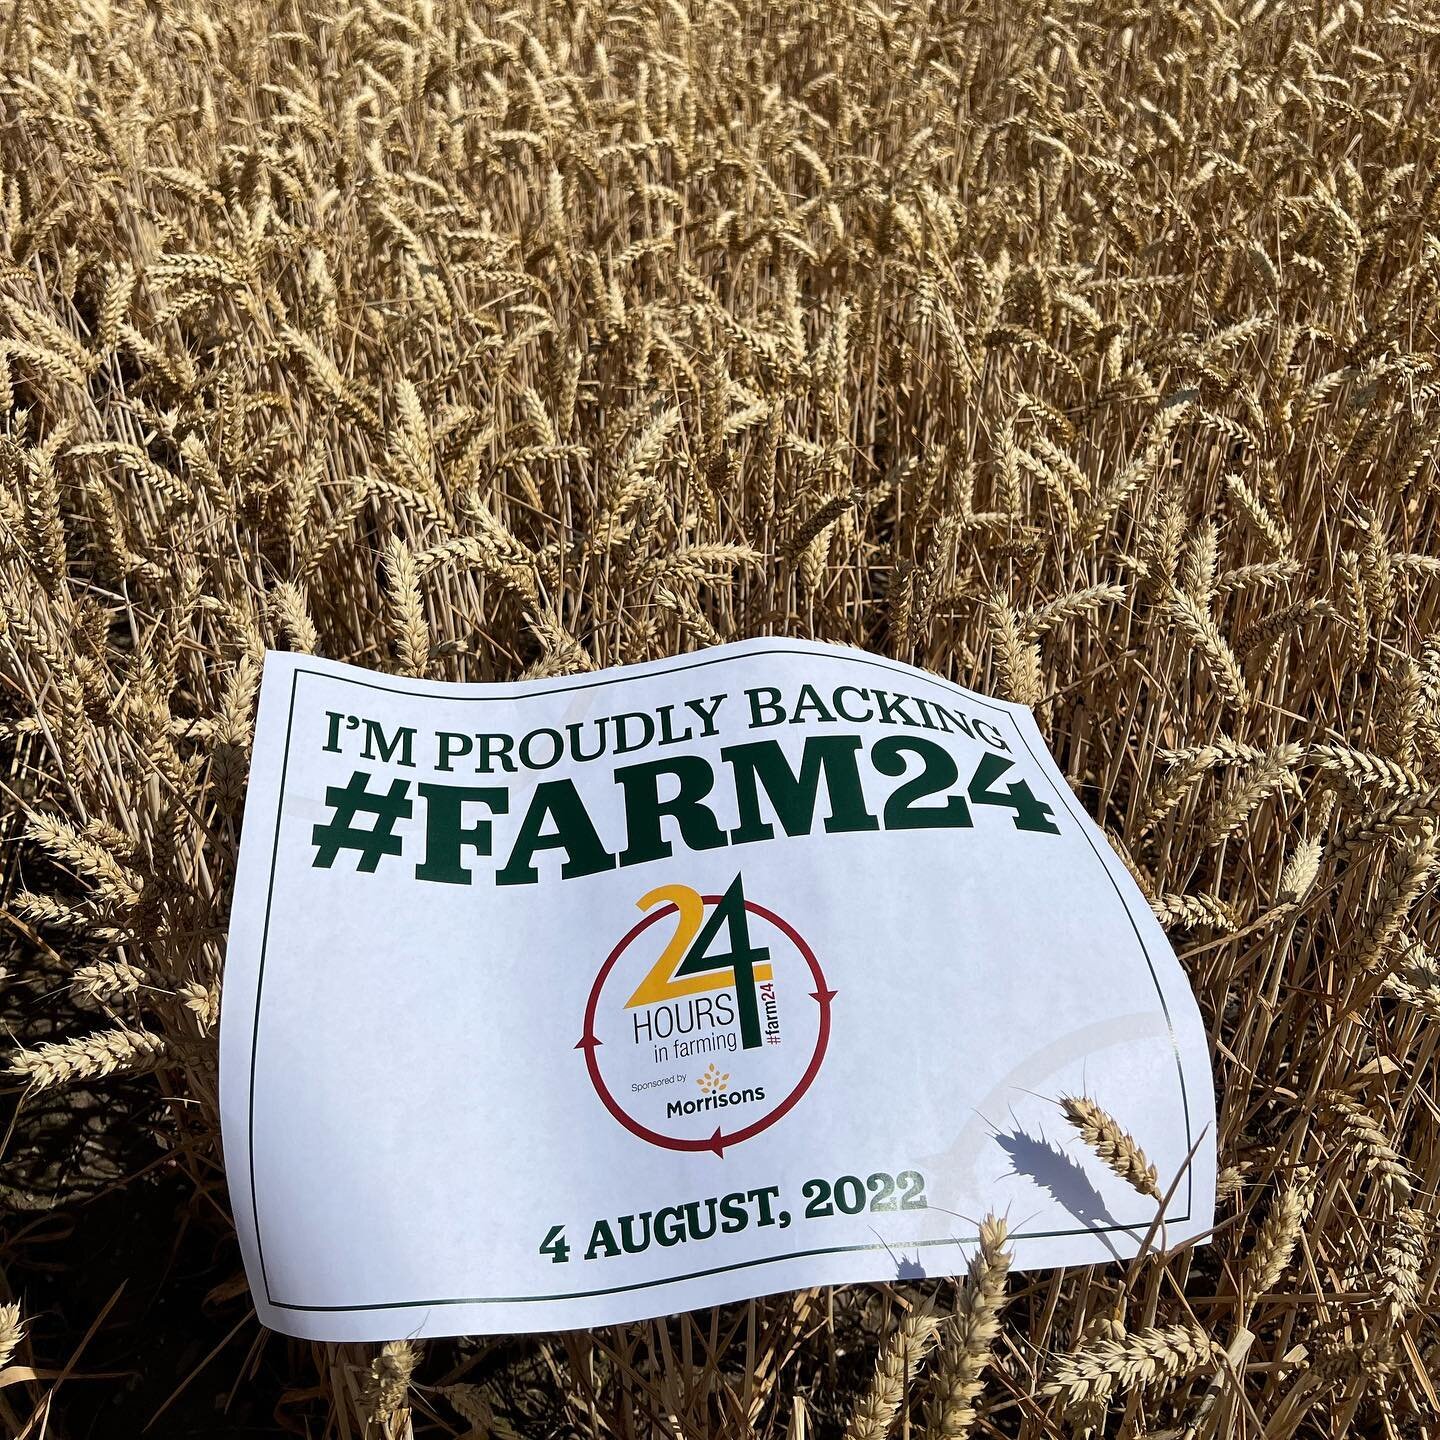 #Farm24 is complete for another year here at Hammond Produce.

It is so important to back British Agriculture, so please help do your bit and Buy British Produce 🇬🇧

@morrisons @farmersguardian